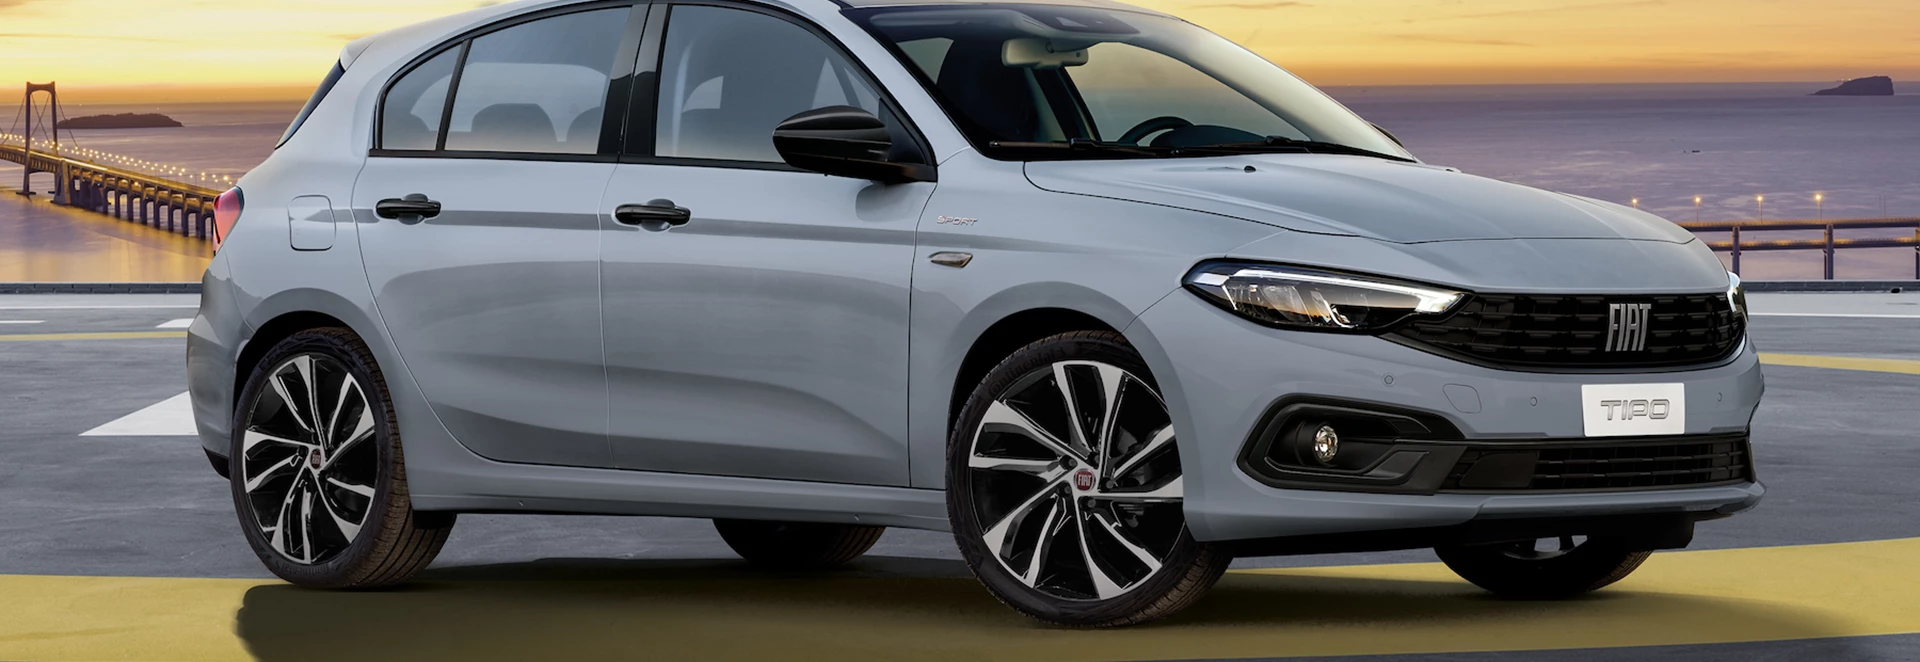 Fiat Tipo range expands with new City Sport model 